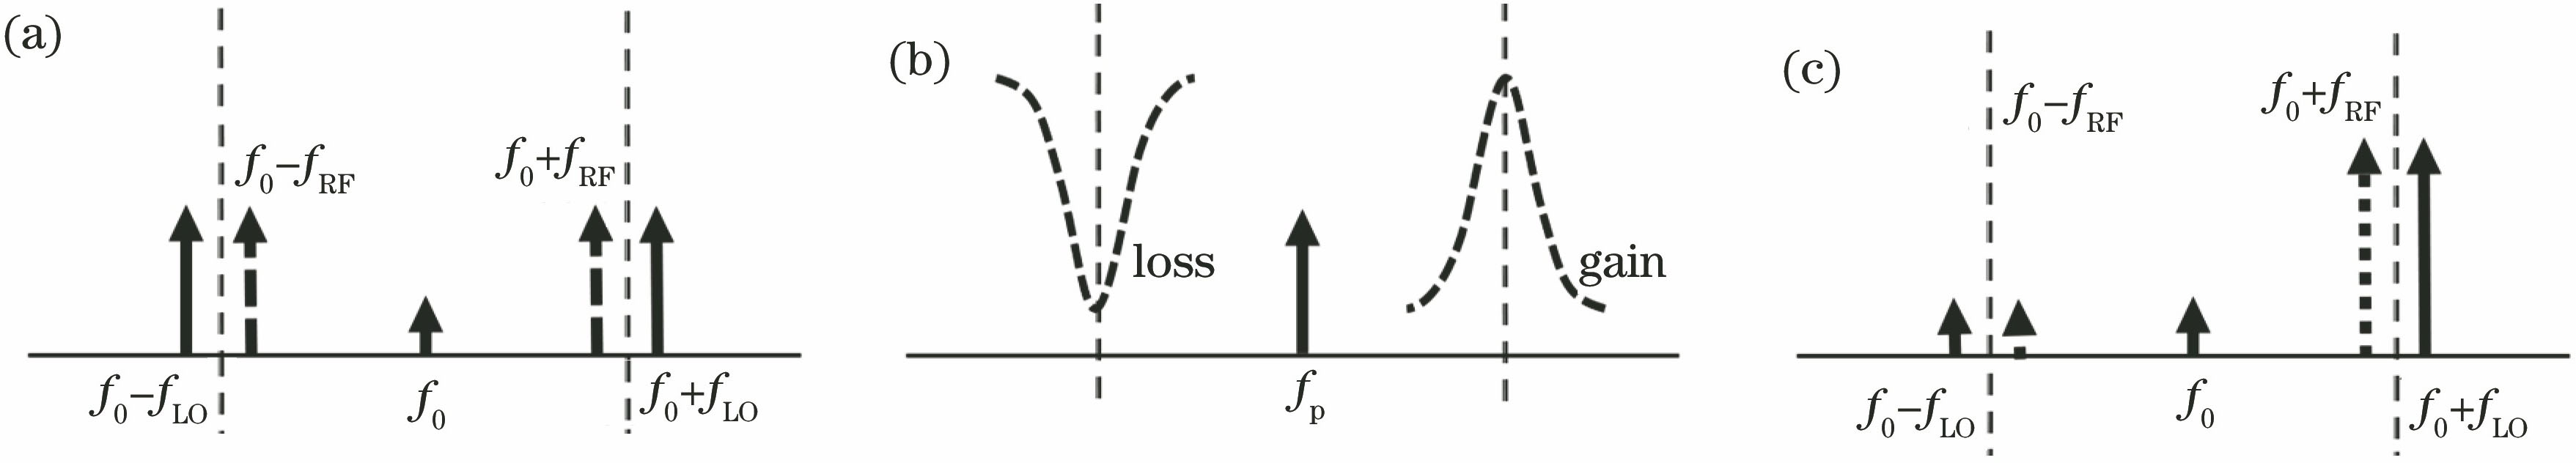 Frequency spectrum processing of SBS effect. (a) Double-sideband modulation with suppressed carrier;(b) gain and loss spectra of pumping laser and SBS; (c) final spectrum after SBS effect